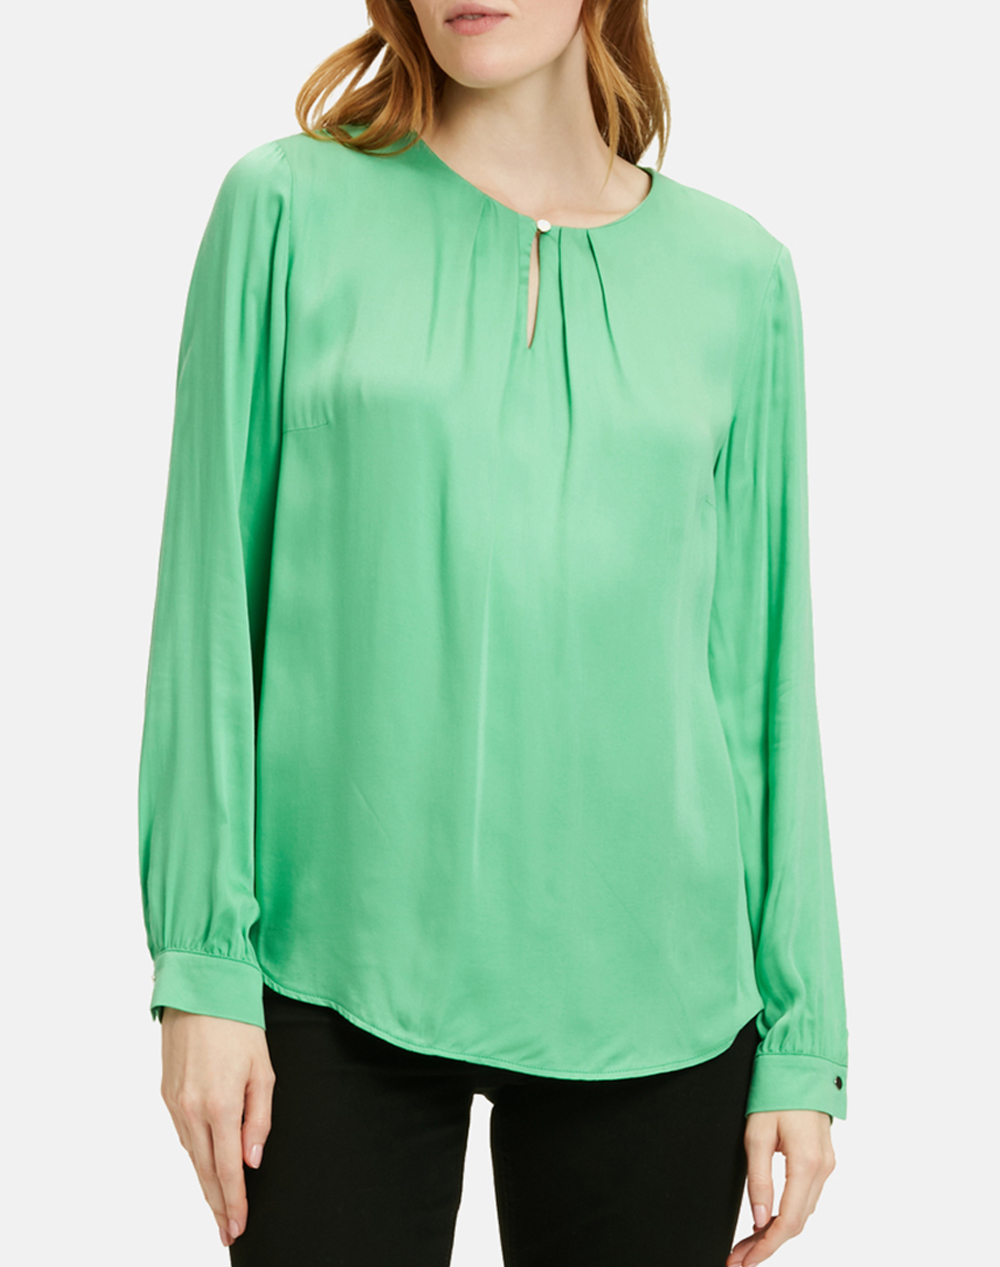 BETTY BARCLAY Bluse 8670/2409-5266 Green